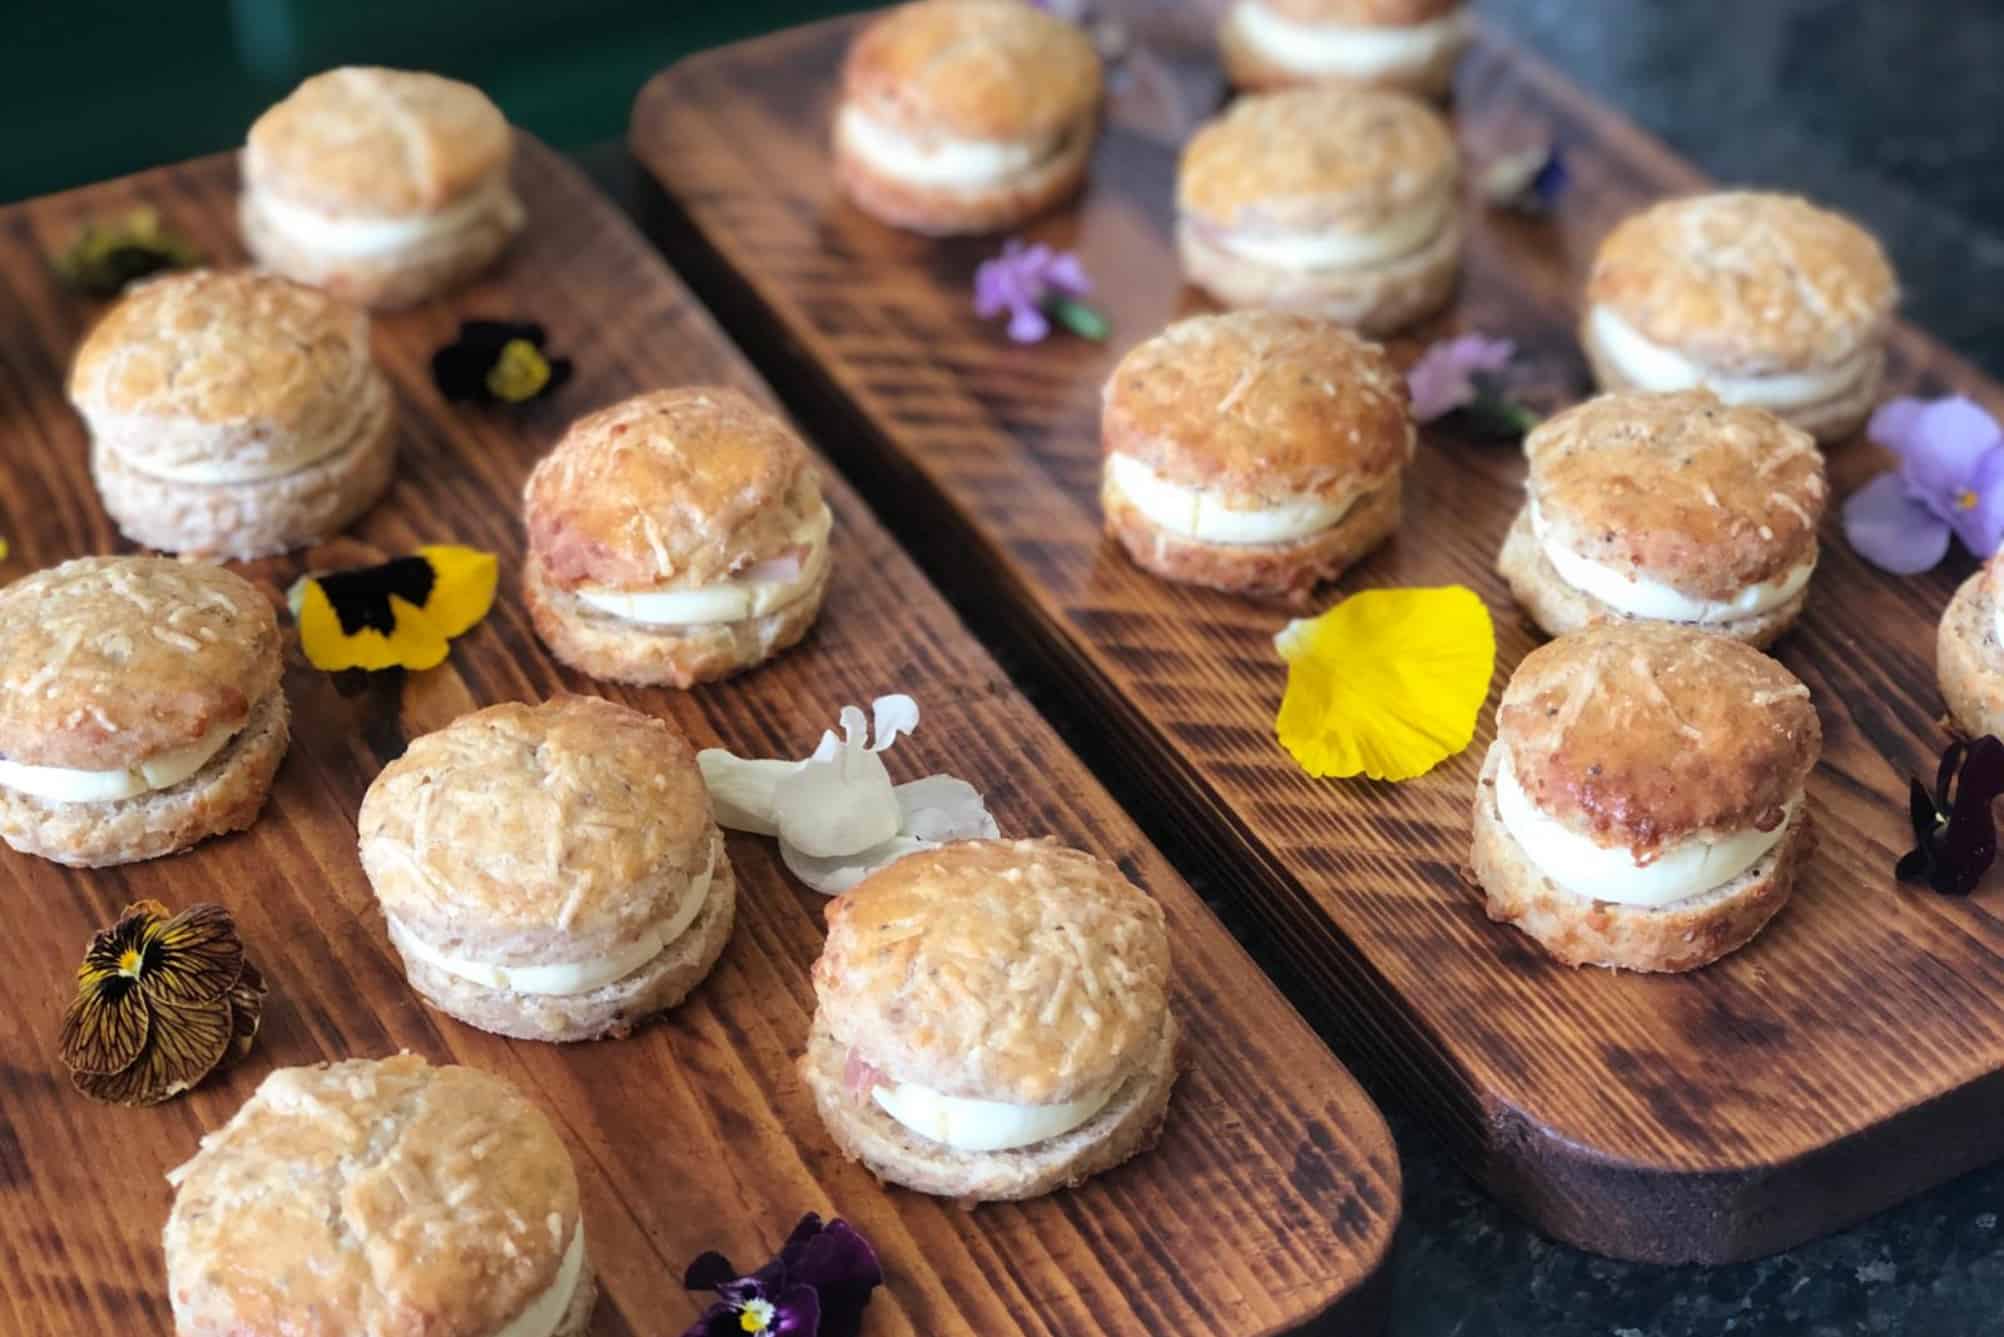 Savourty scones on a wooden board